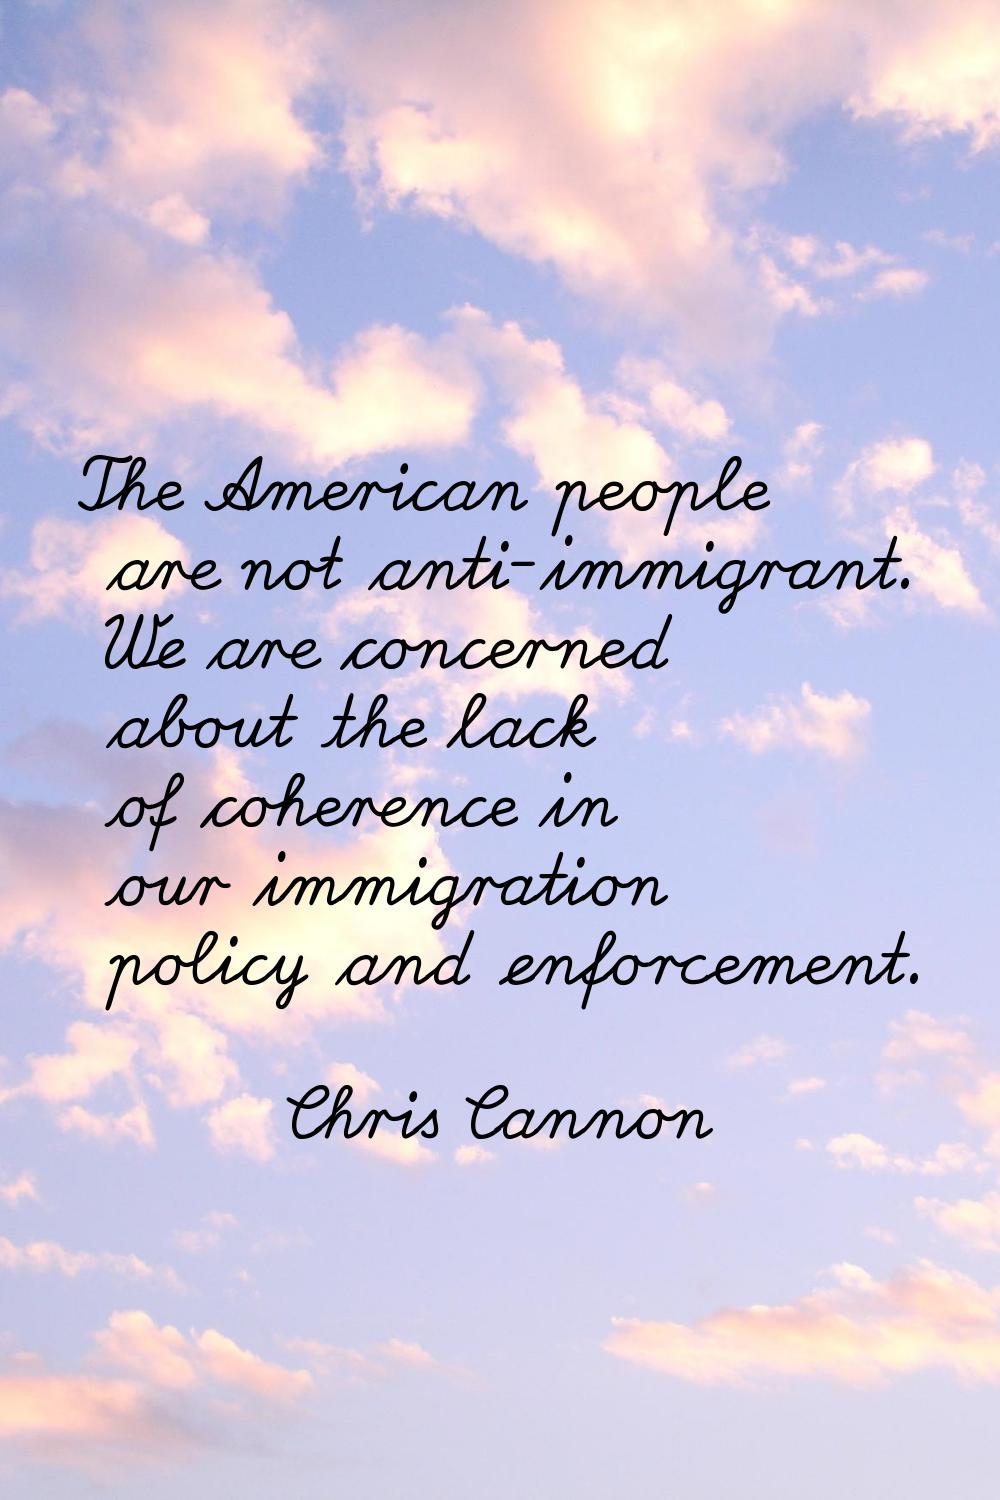 The American people are not anti-immigrant. We are concerned about the lack of coherence in our imm